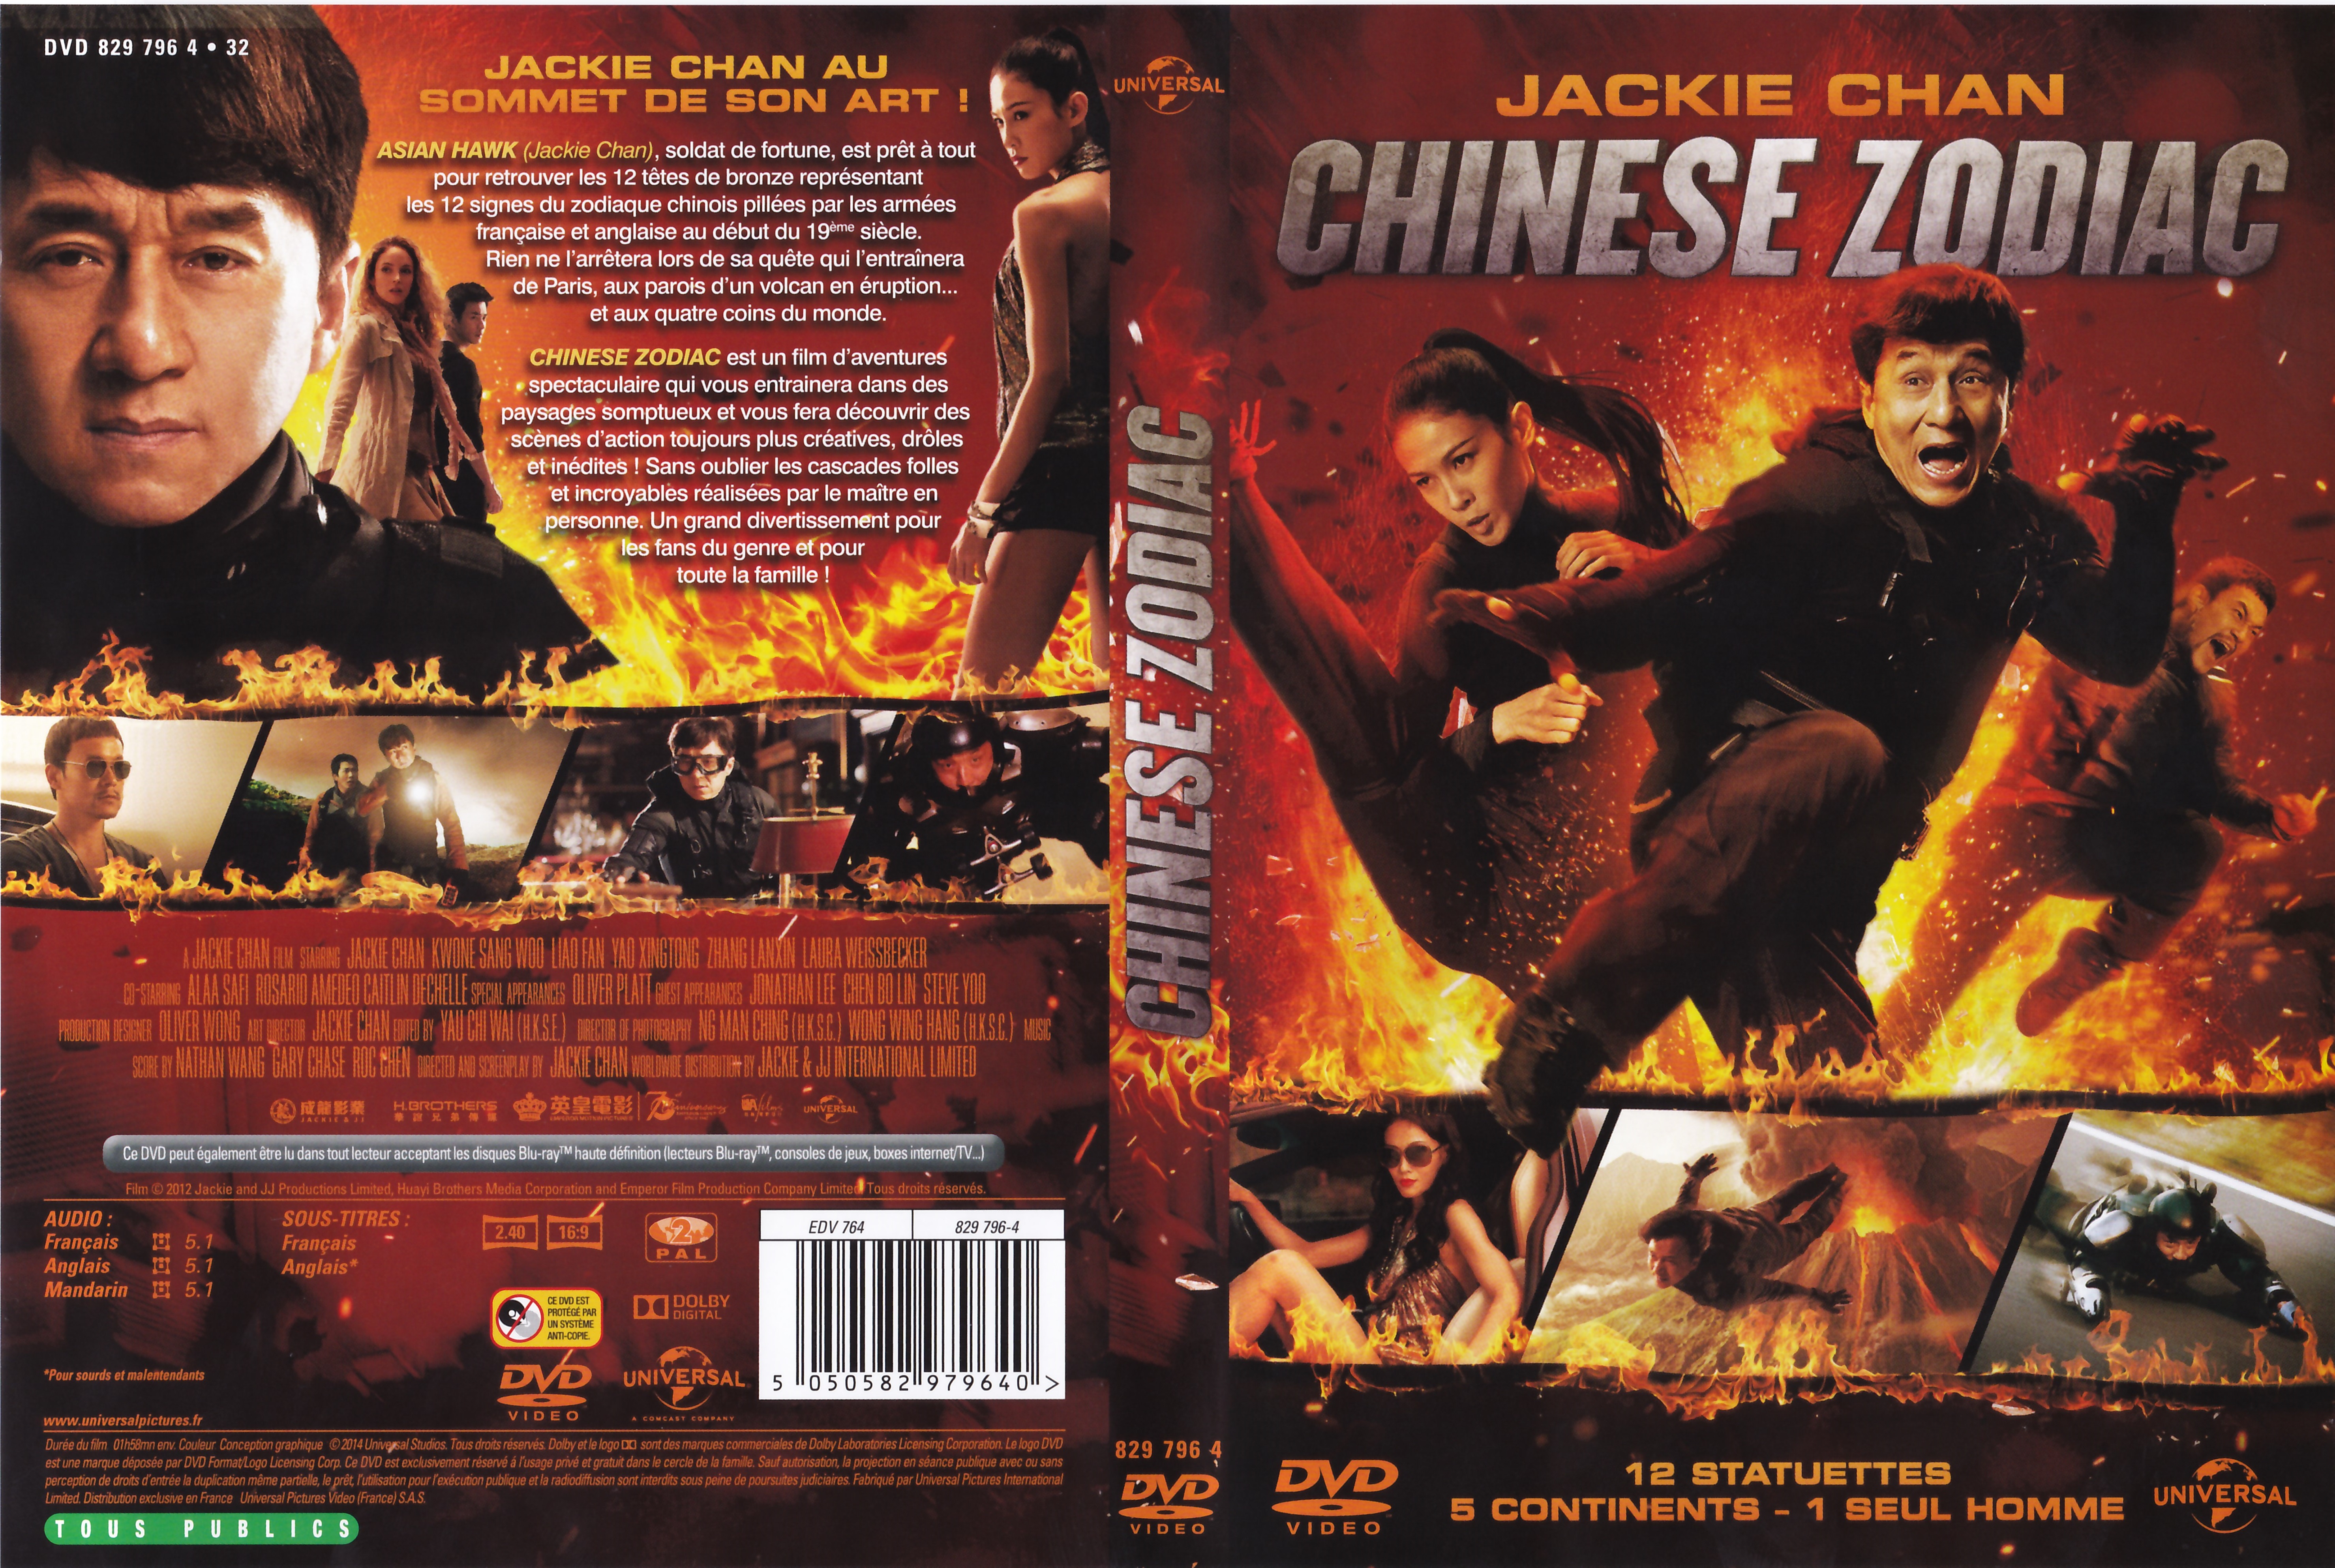 Jaquette DVD Chinese Zodiac